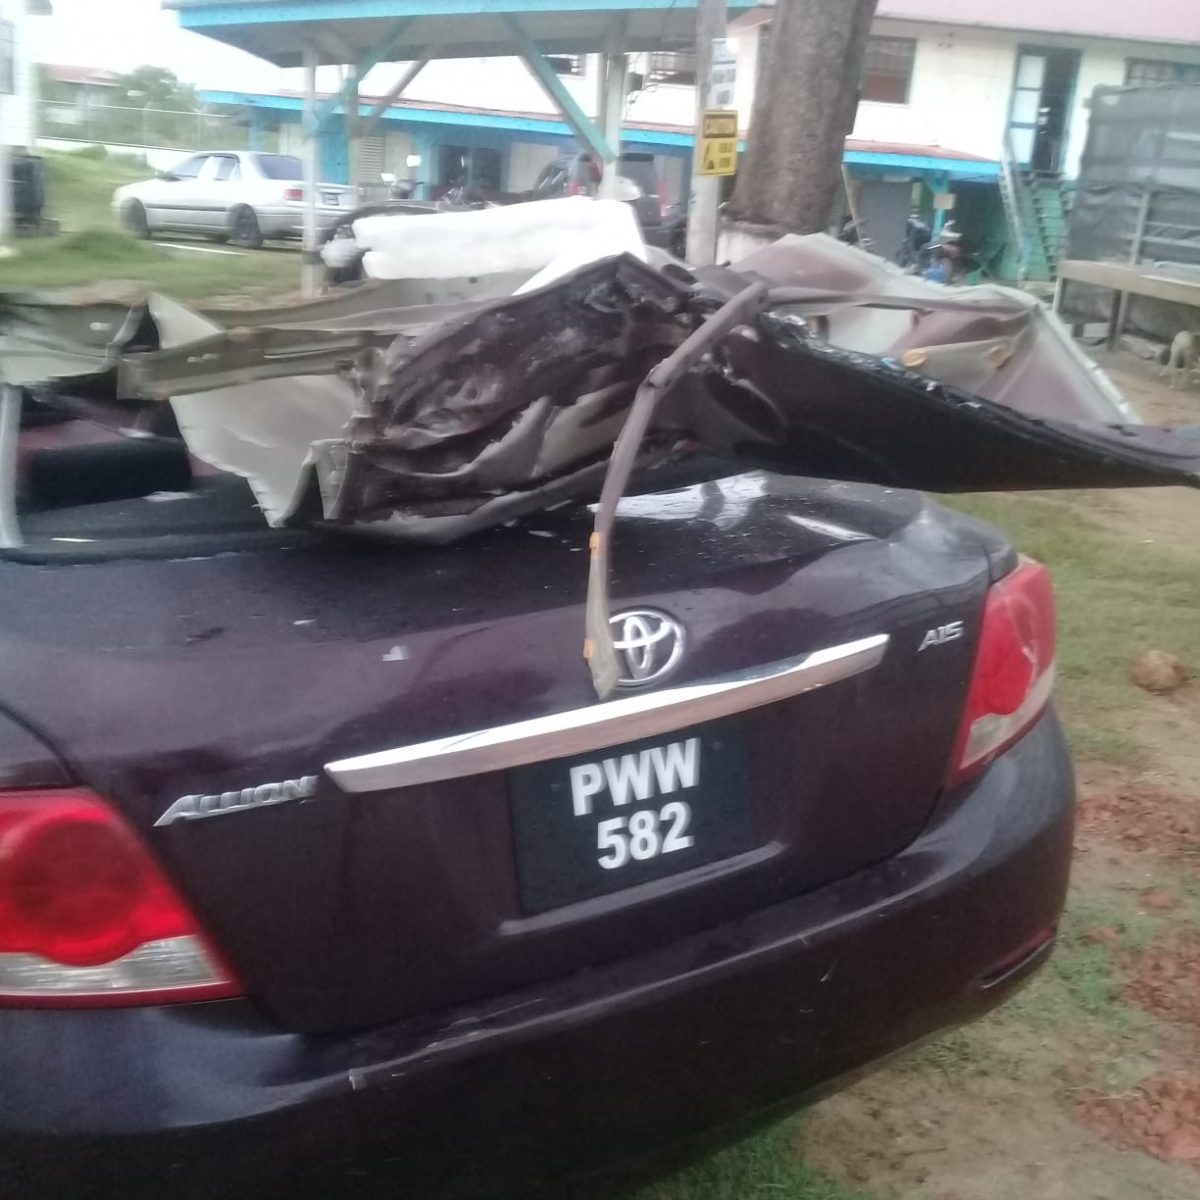 One of the cars which was involved in the accident